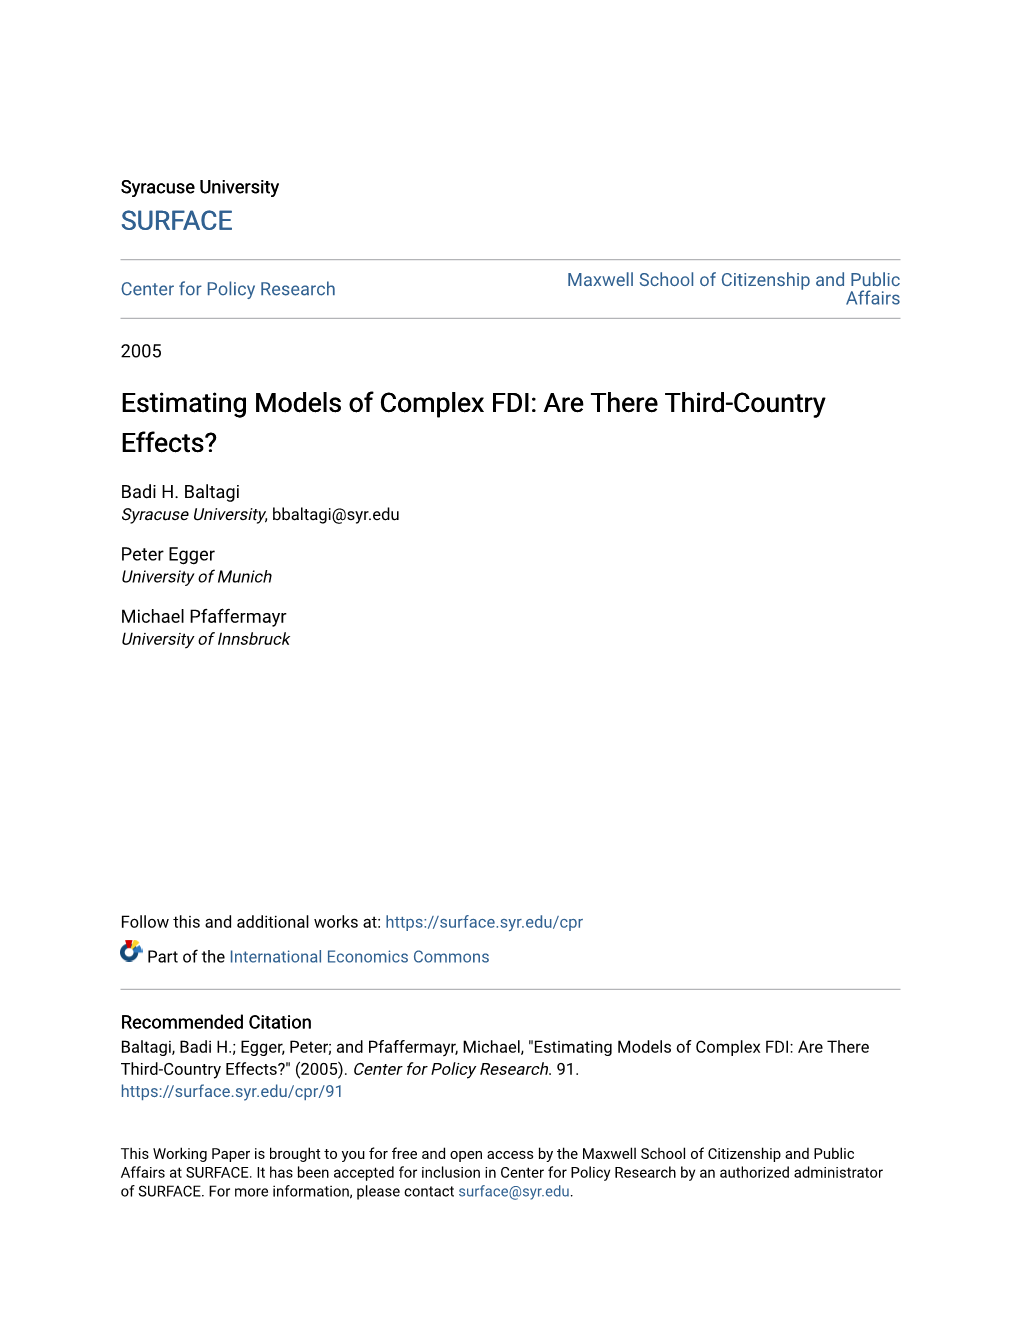 Estimating Models of Complex FDI: Are There Third-Country Effects?